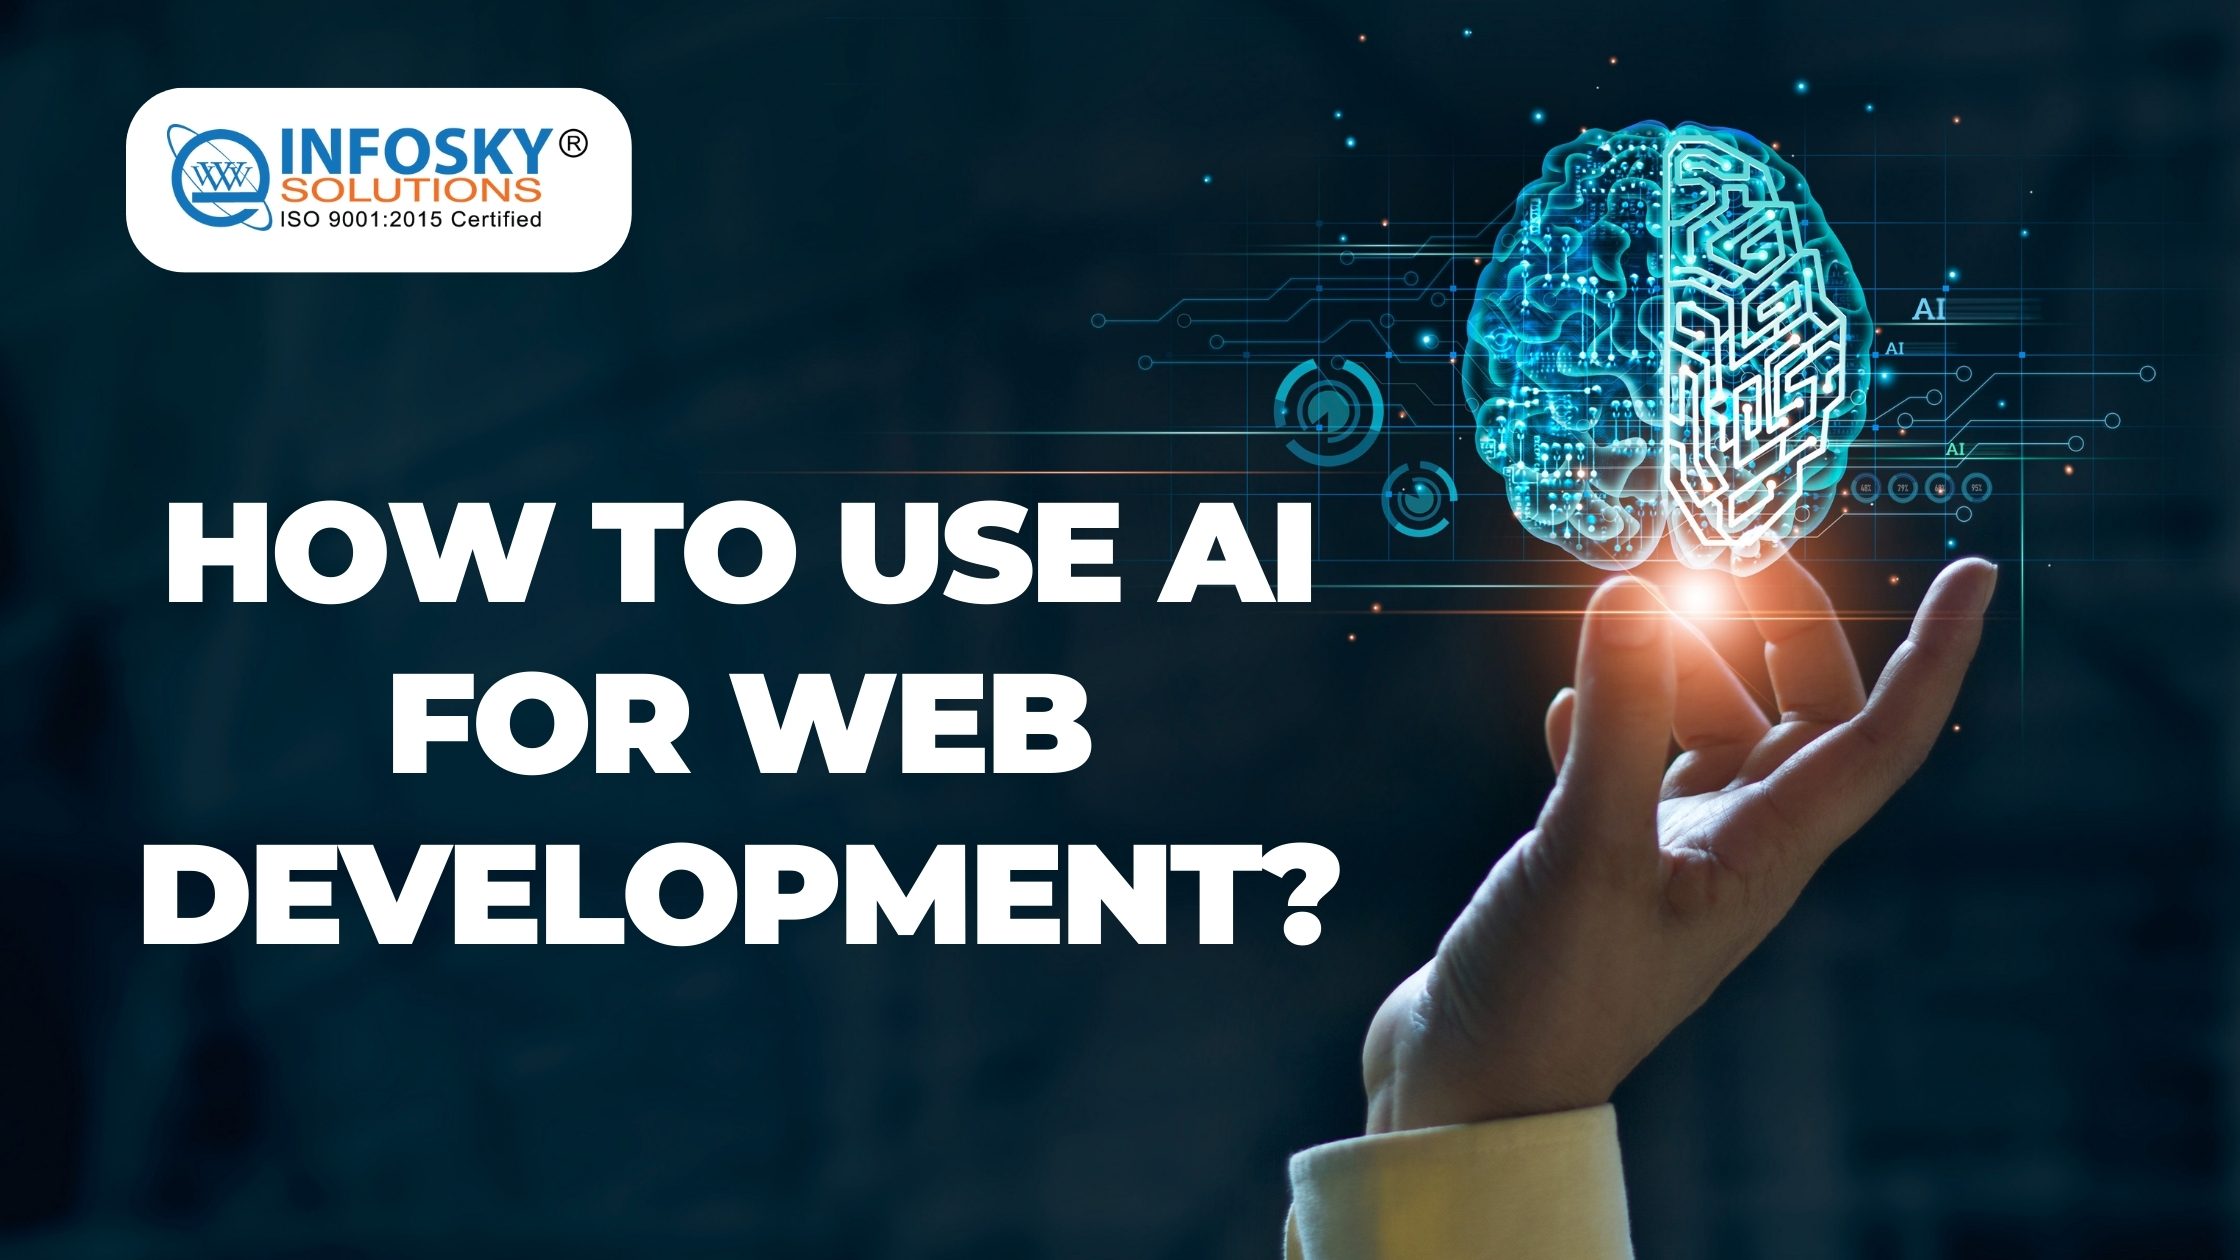 How to use AI for web development - a blog by Infosky Solutions - Best Web Development company in Kolkata